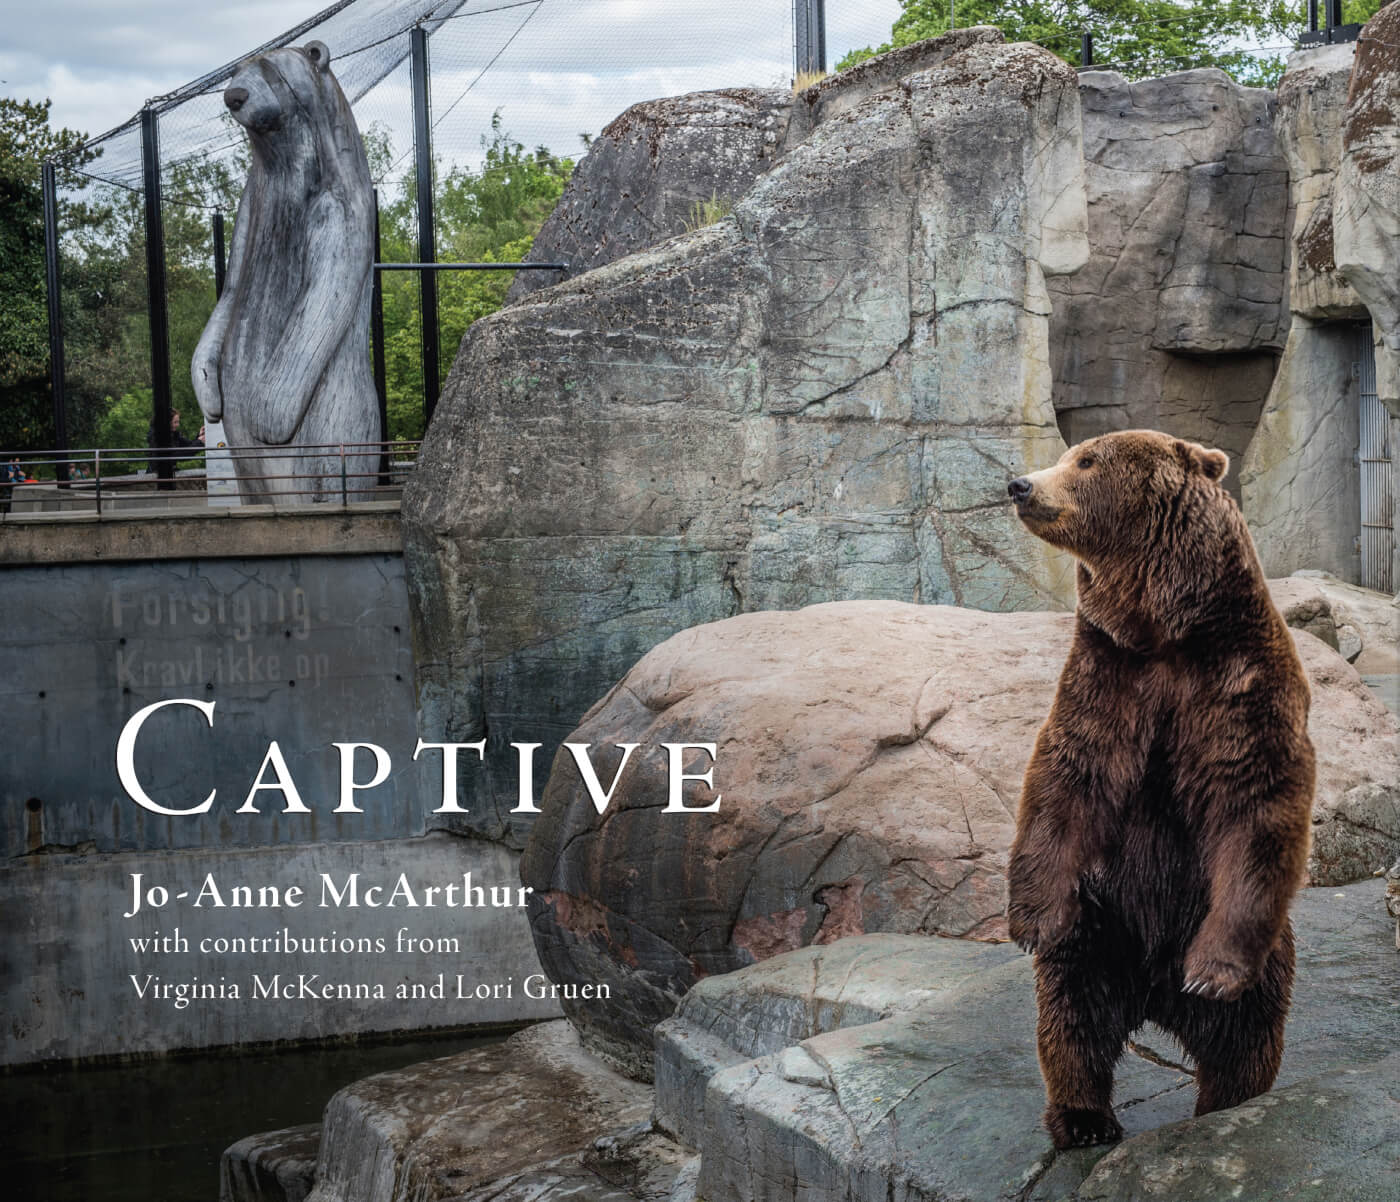 These Photos of Captive Animals Will Break Your Heart